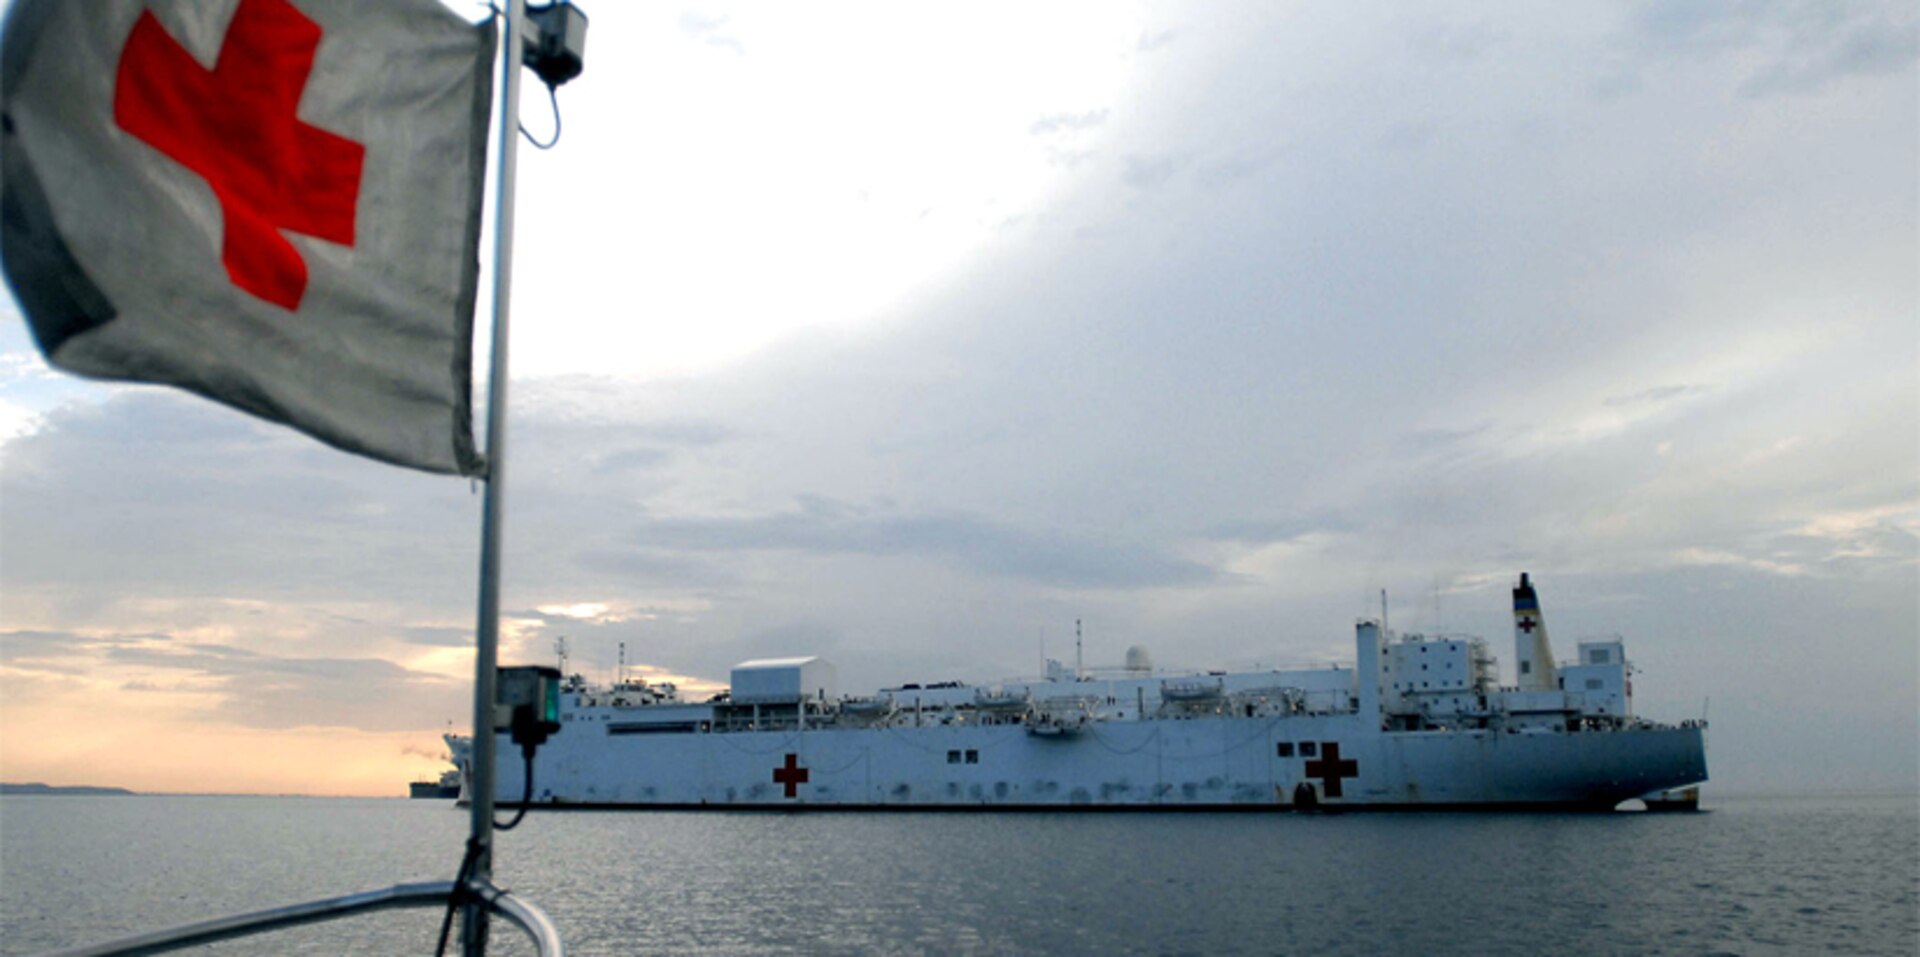 The hospital ship USNS Comfort at anchorage off the coast of Haiti in 2007.